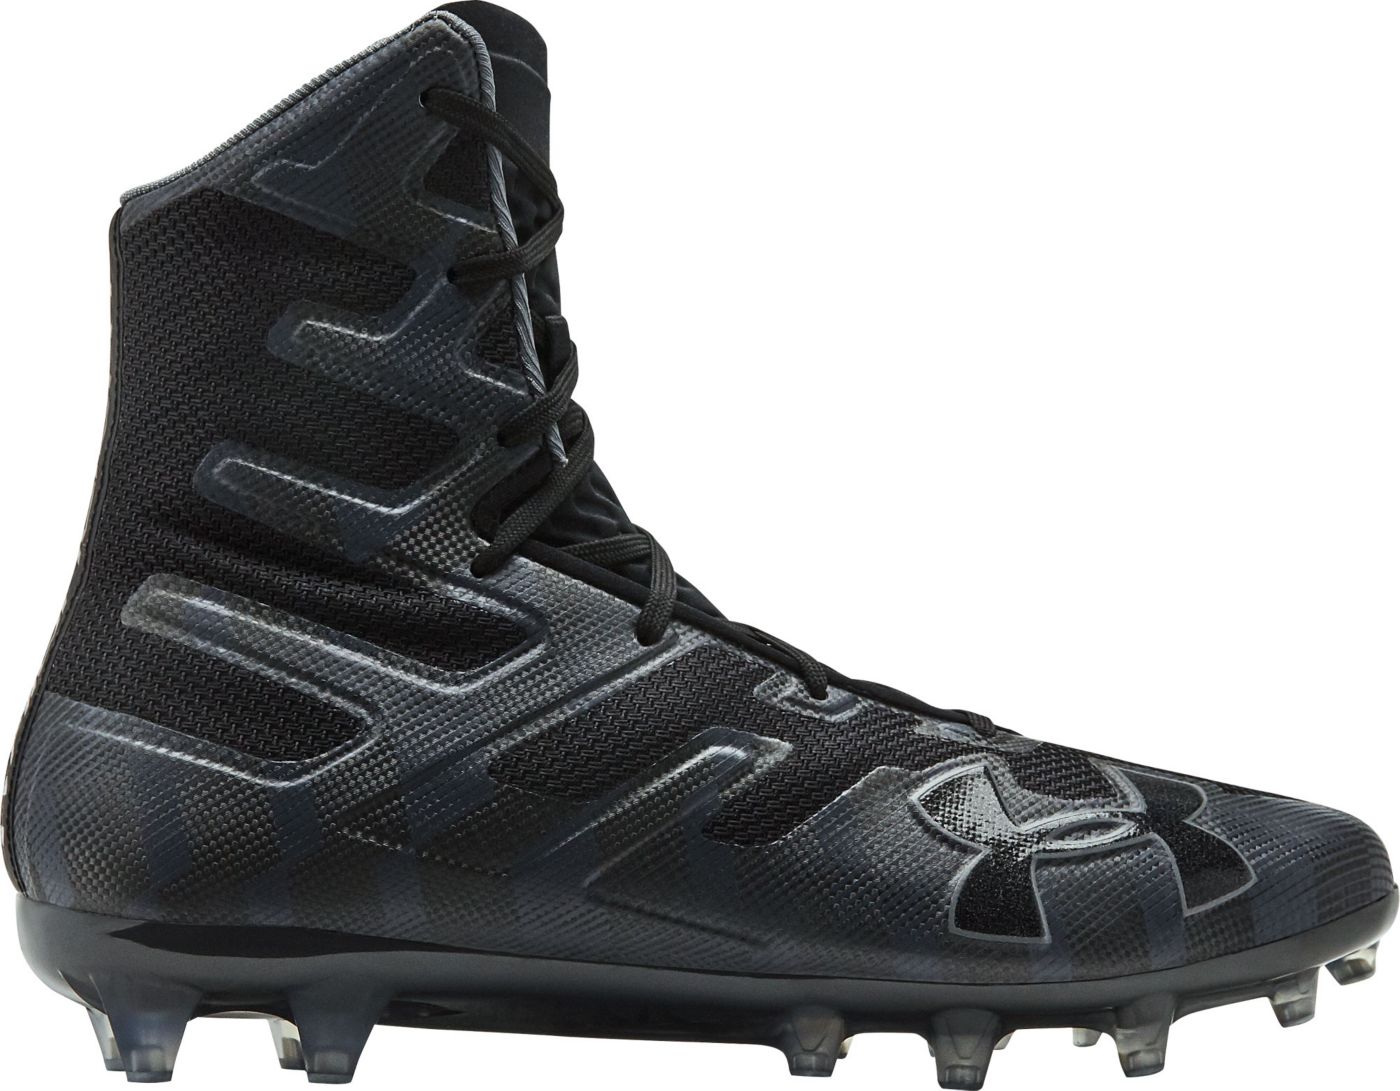 Under Armour Men's Highlight MC Lacrosse Cleats DICK'S Sporting Goods